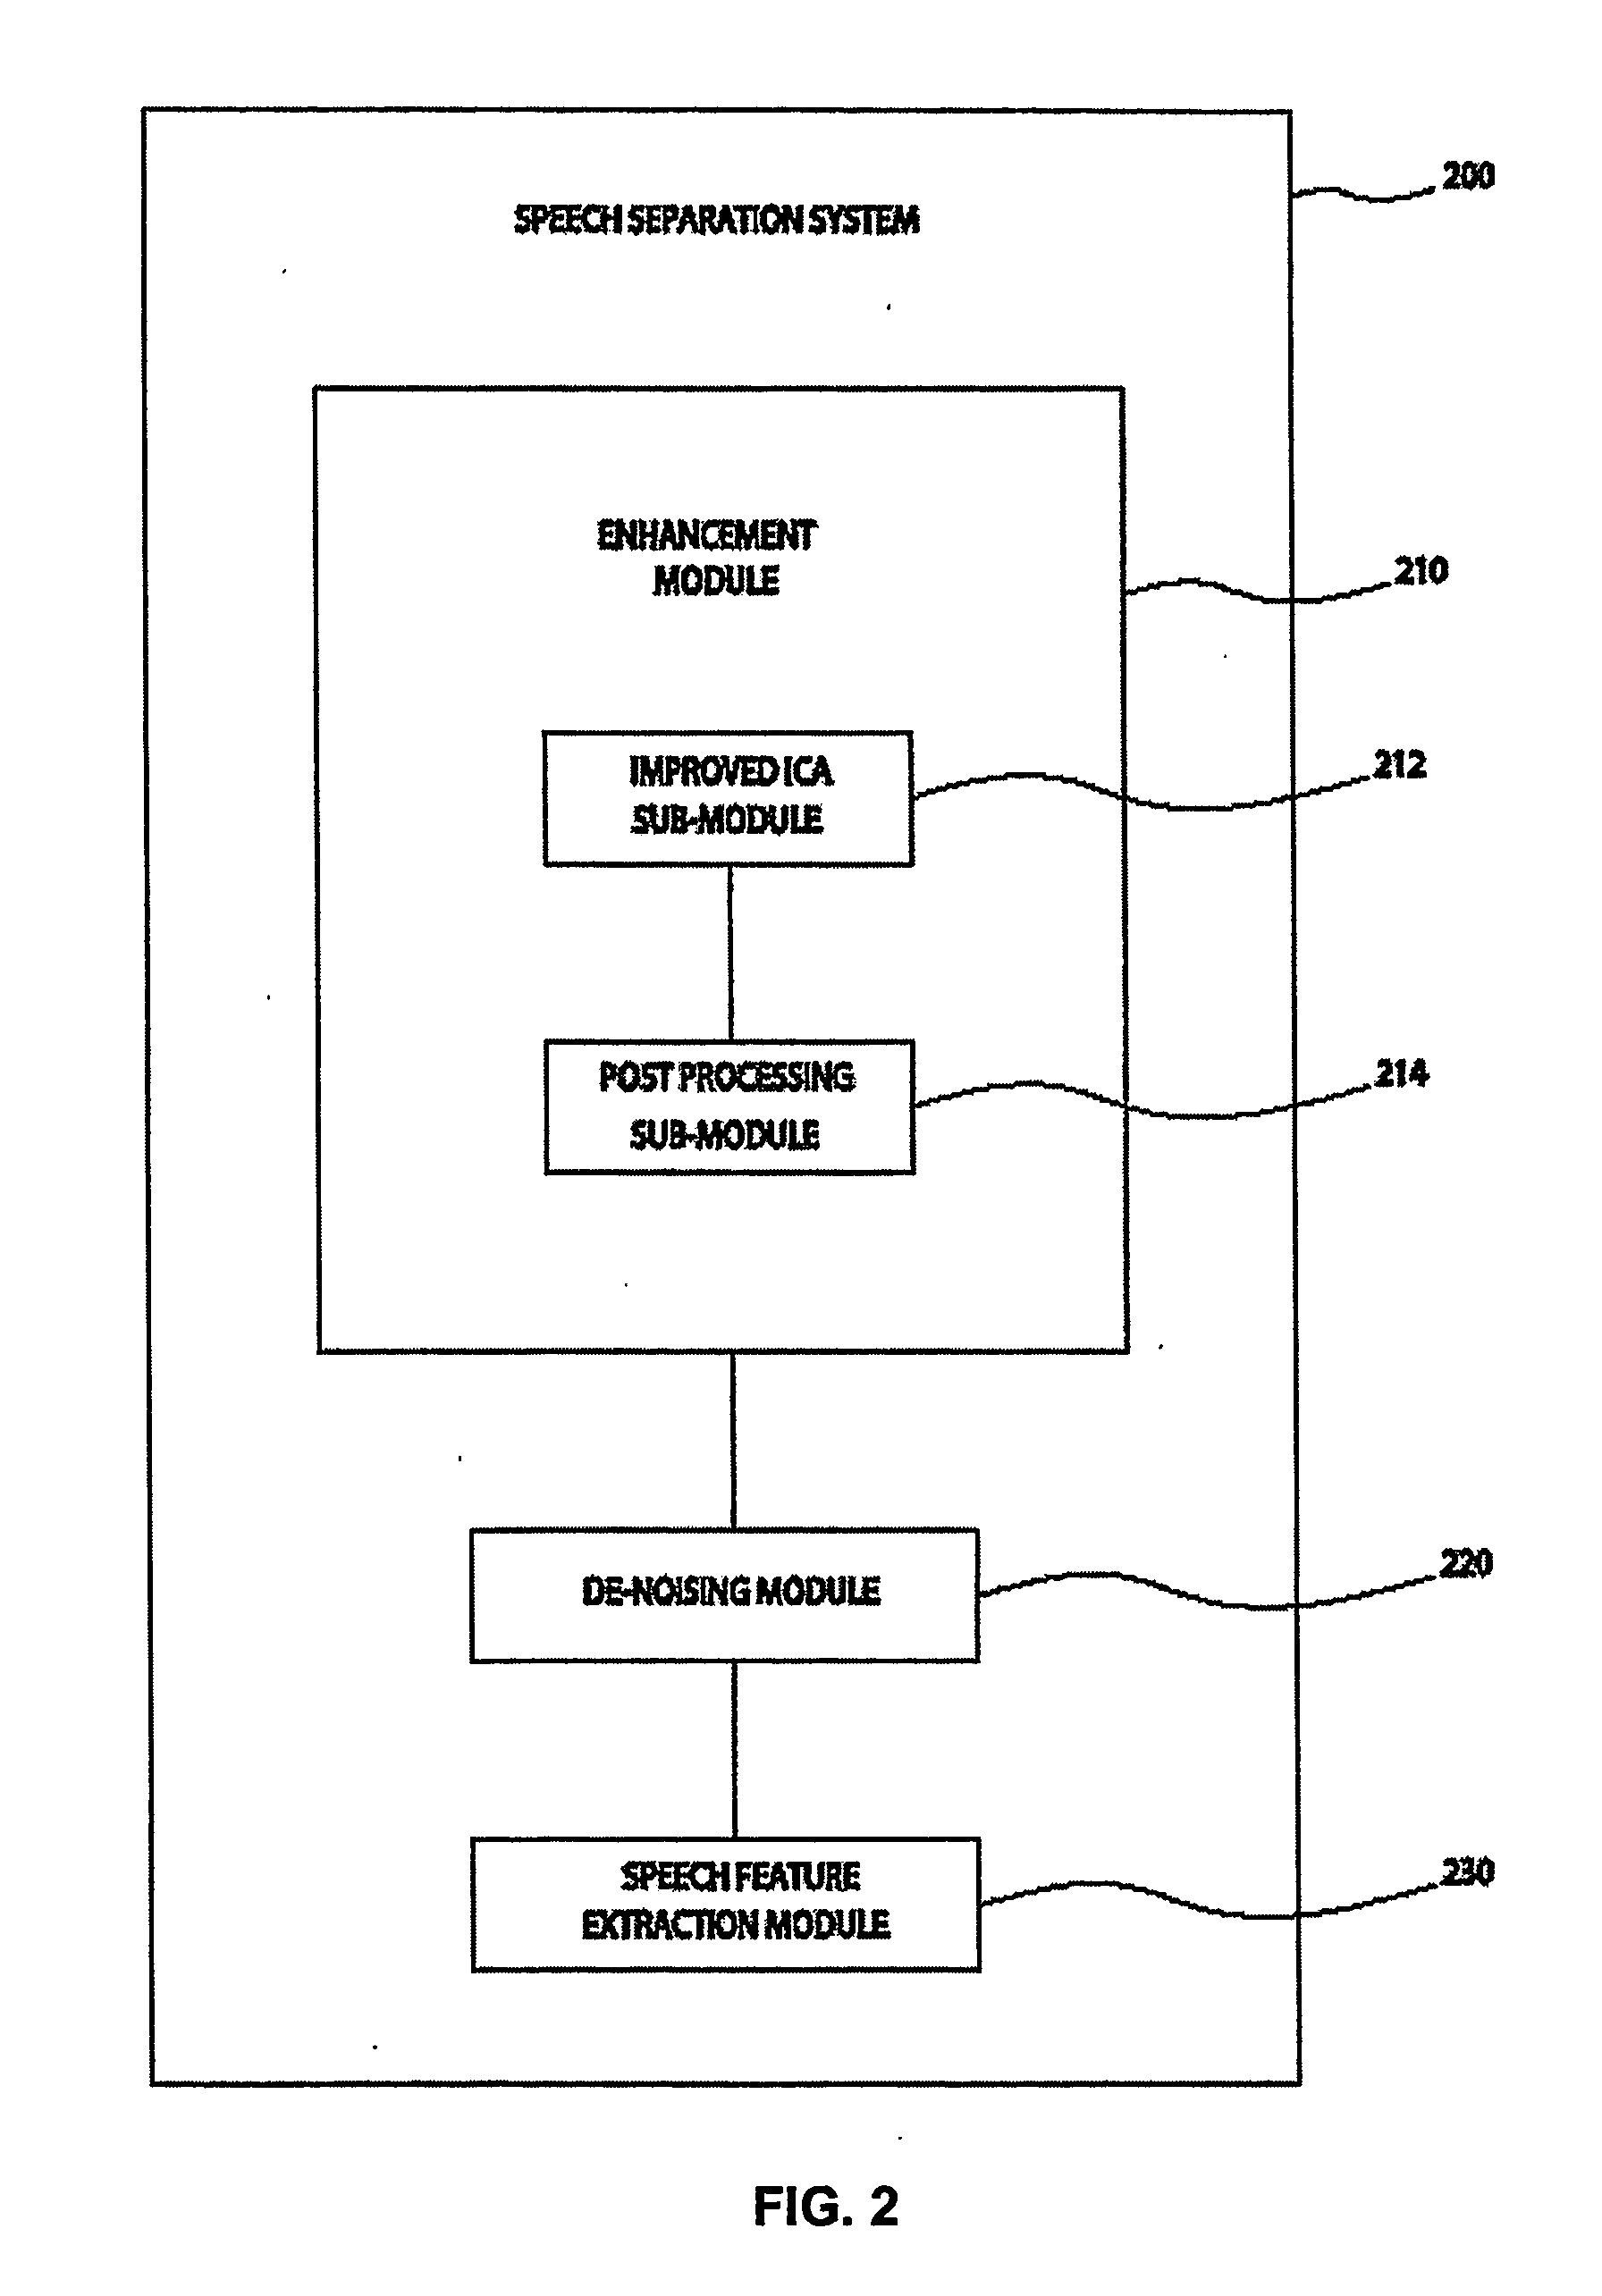 System and method for speech processing using independent component analysis under stability restraints